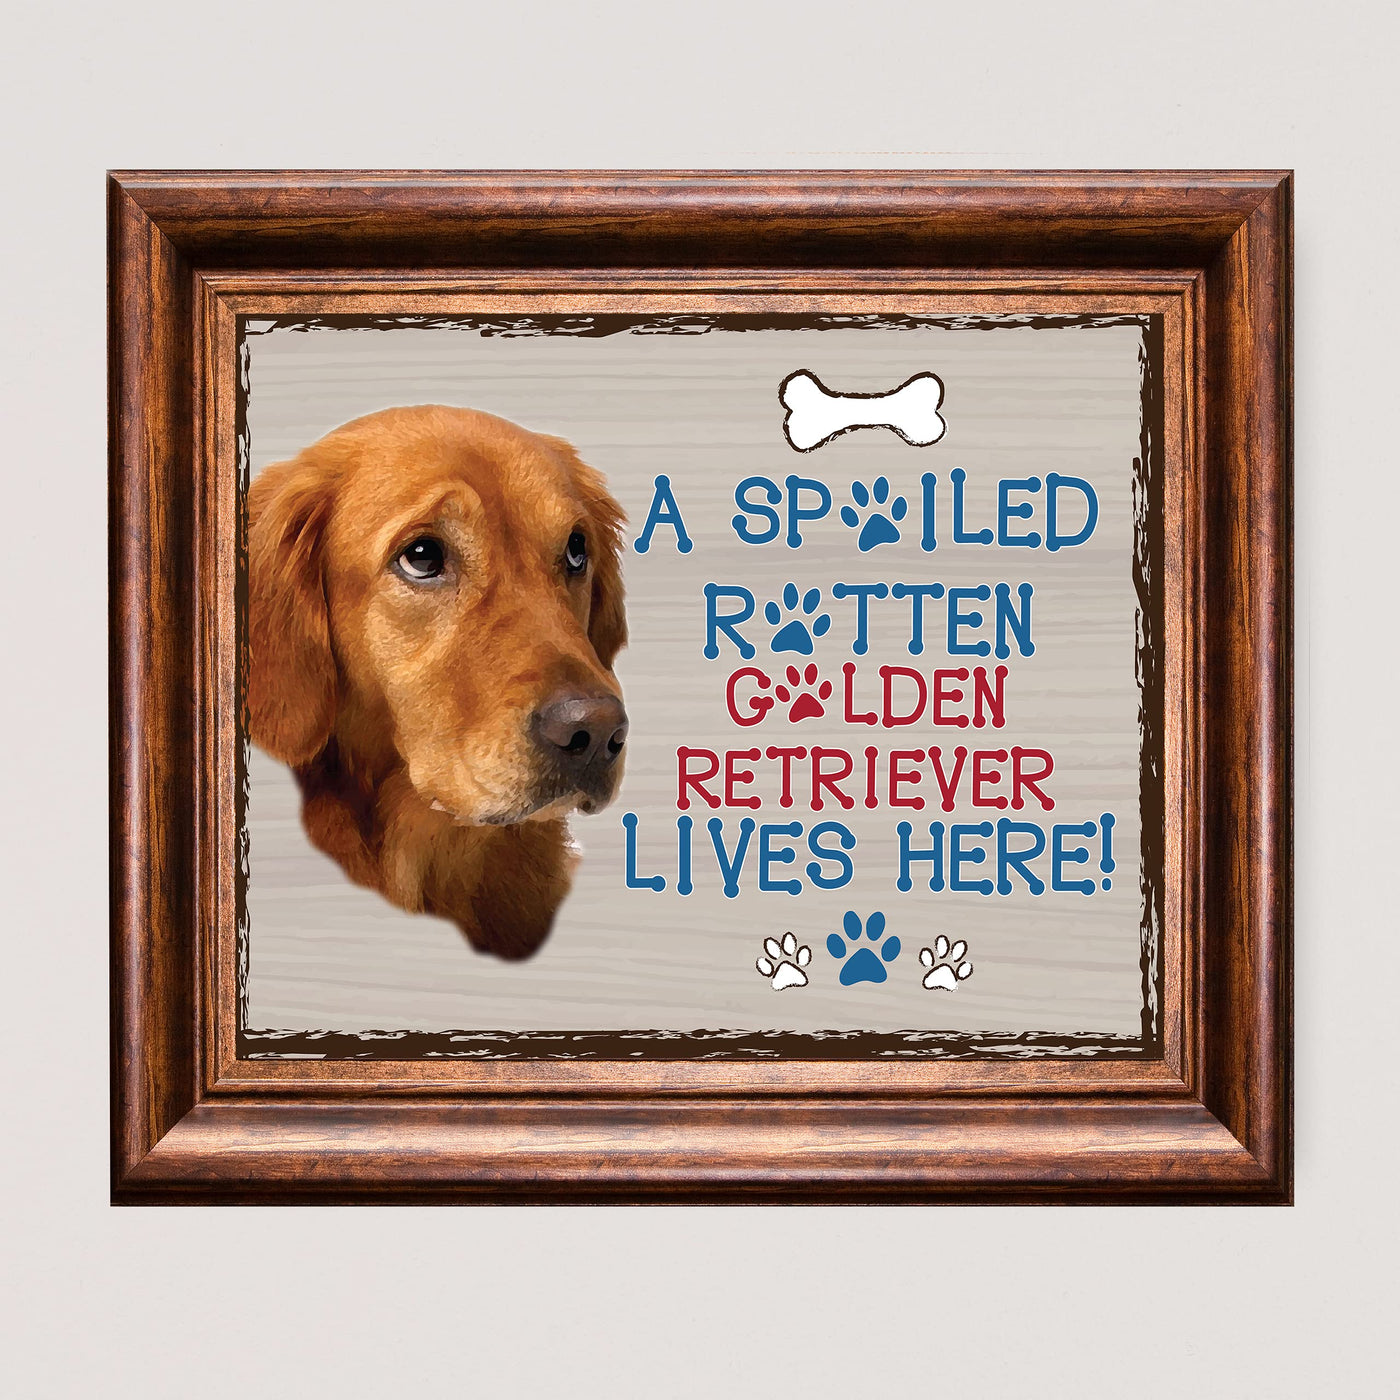 Golden Lab- Dog Poster Print-10 x 8" Wall Decor Sign-Ready To Frame."A Spoiled Rotten Golden Retriever Lives Here". Perfect Pet Wall Art for Home-Kitchen-Cave-Bar-Garage. Great Gift for Lab Lovers.